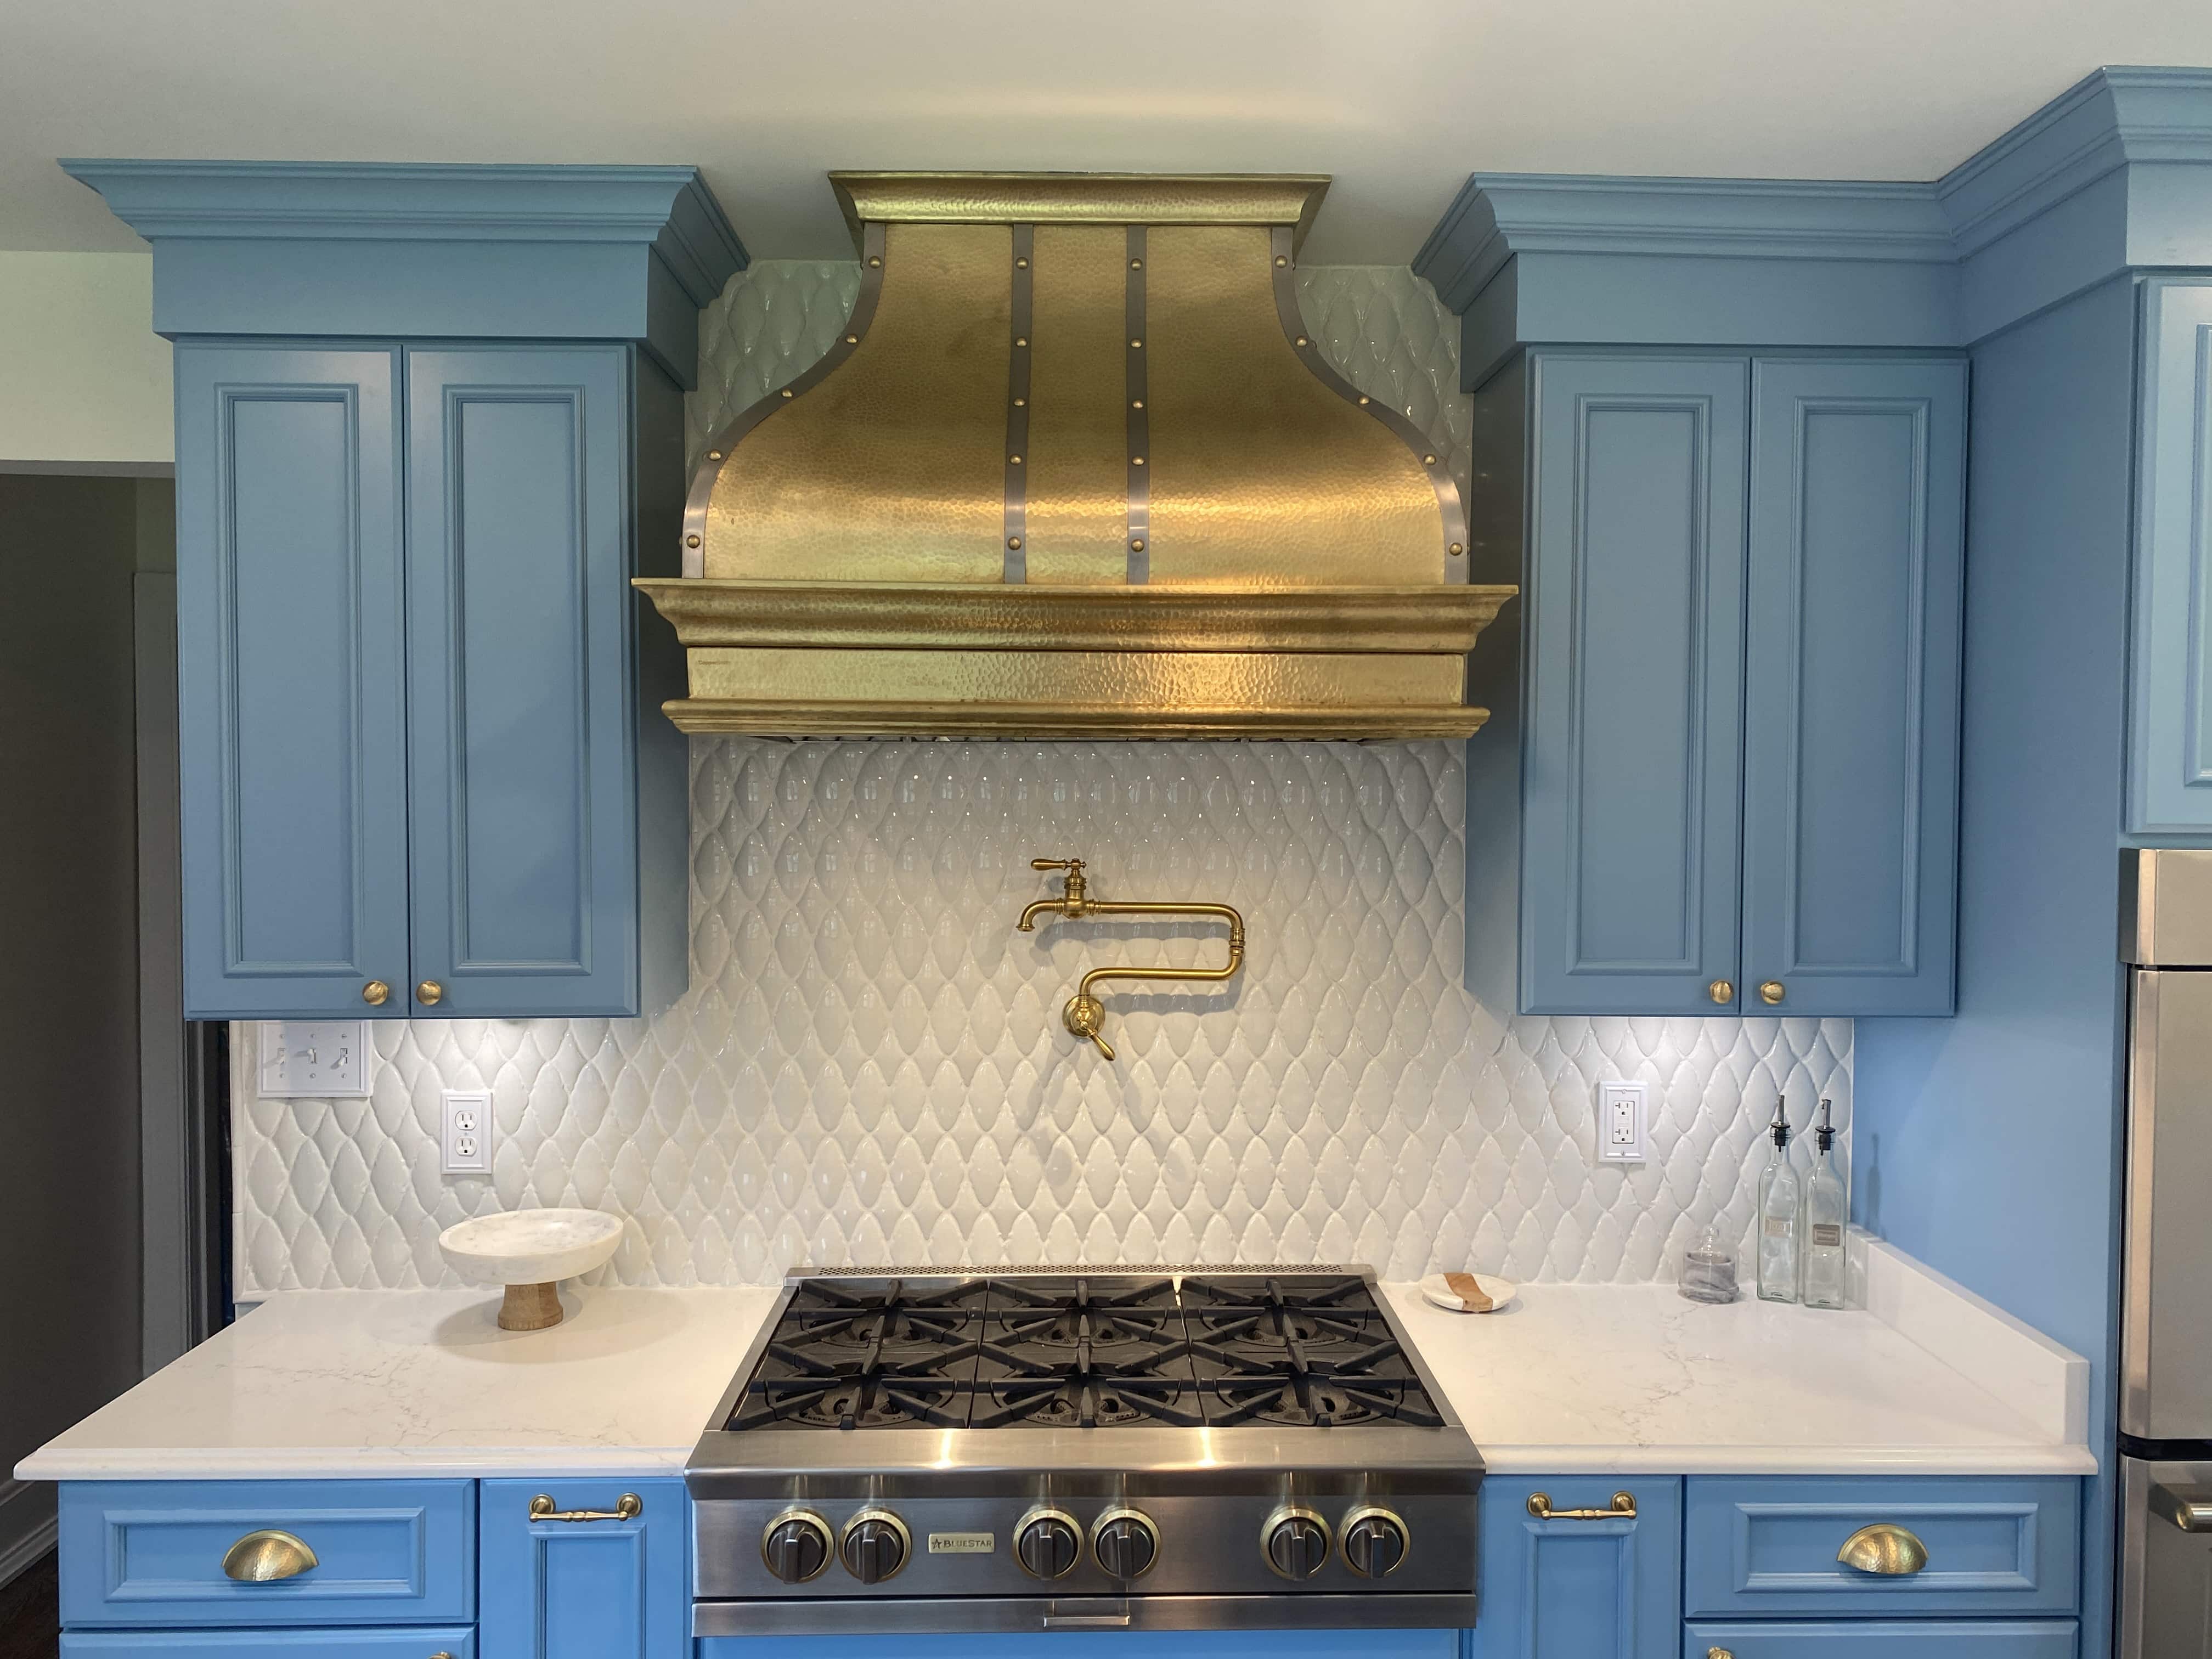 CopperSmith Artisan AT7 Burnished Brass Wall Mount Kitchen Range Hood in a Costal Style kitcvhen with Light Blue cabinets white countertop and white tile backsplash